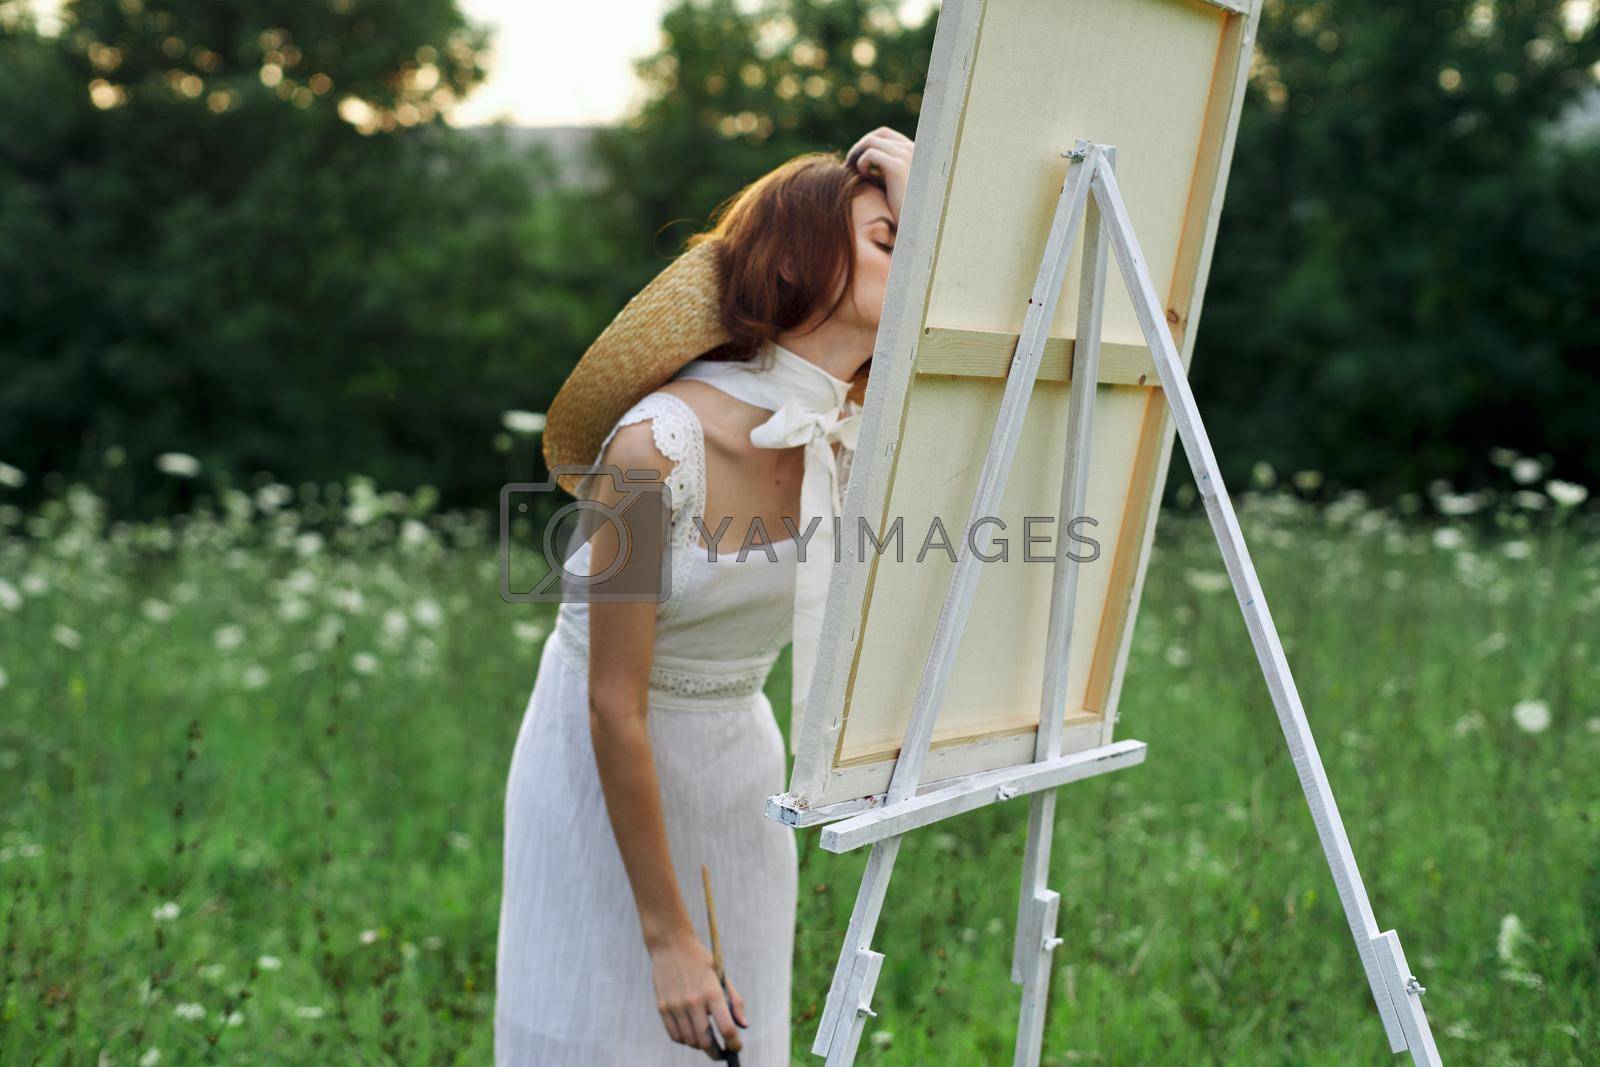 Royalty free image of woman artist outdoors visage creative hobby lifestyle by Vichizh